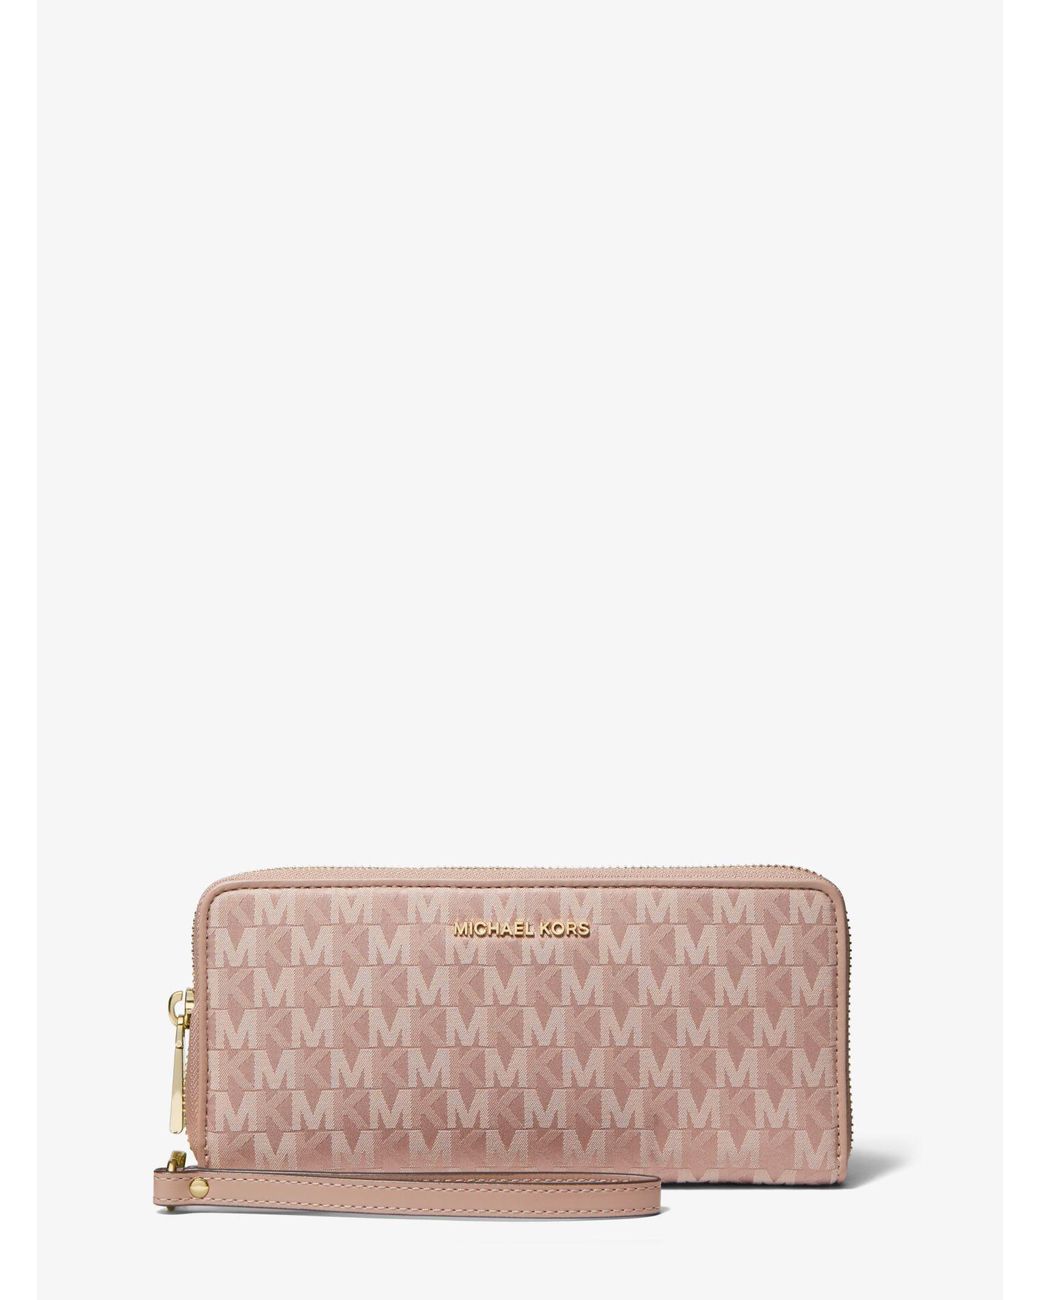 Michael Kors Large Logo Jacquard Continental Wallet in Natural | Lyst